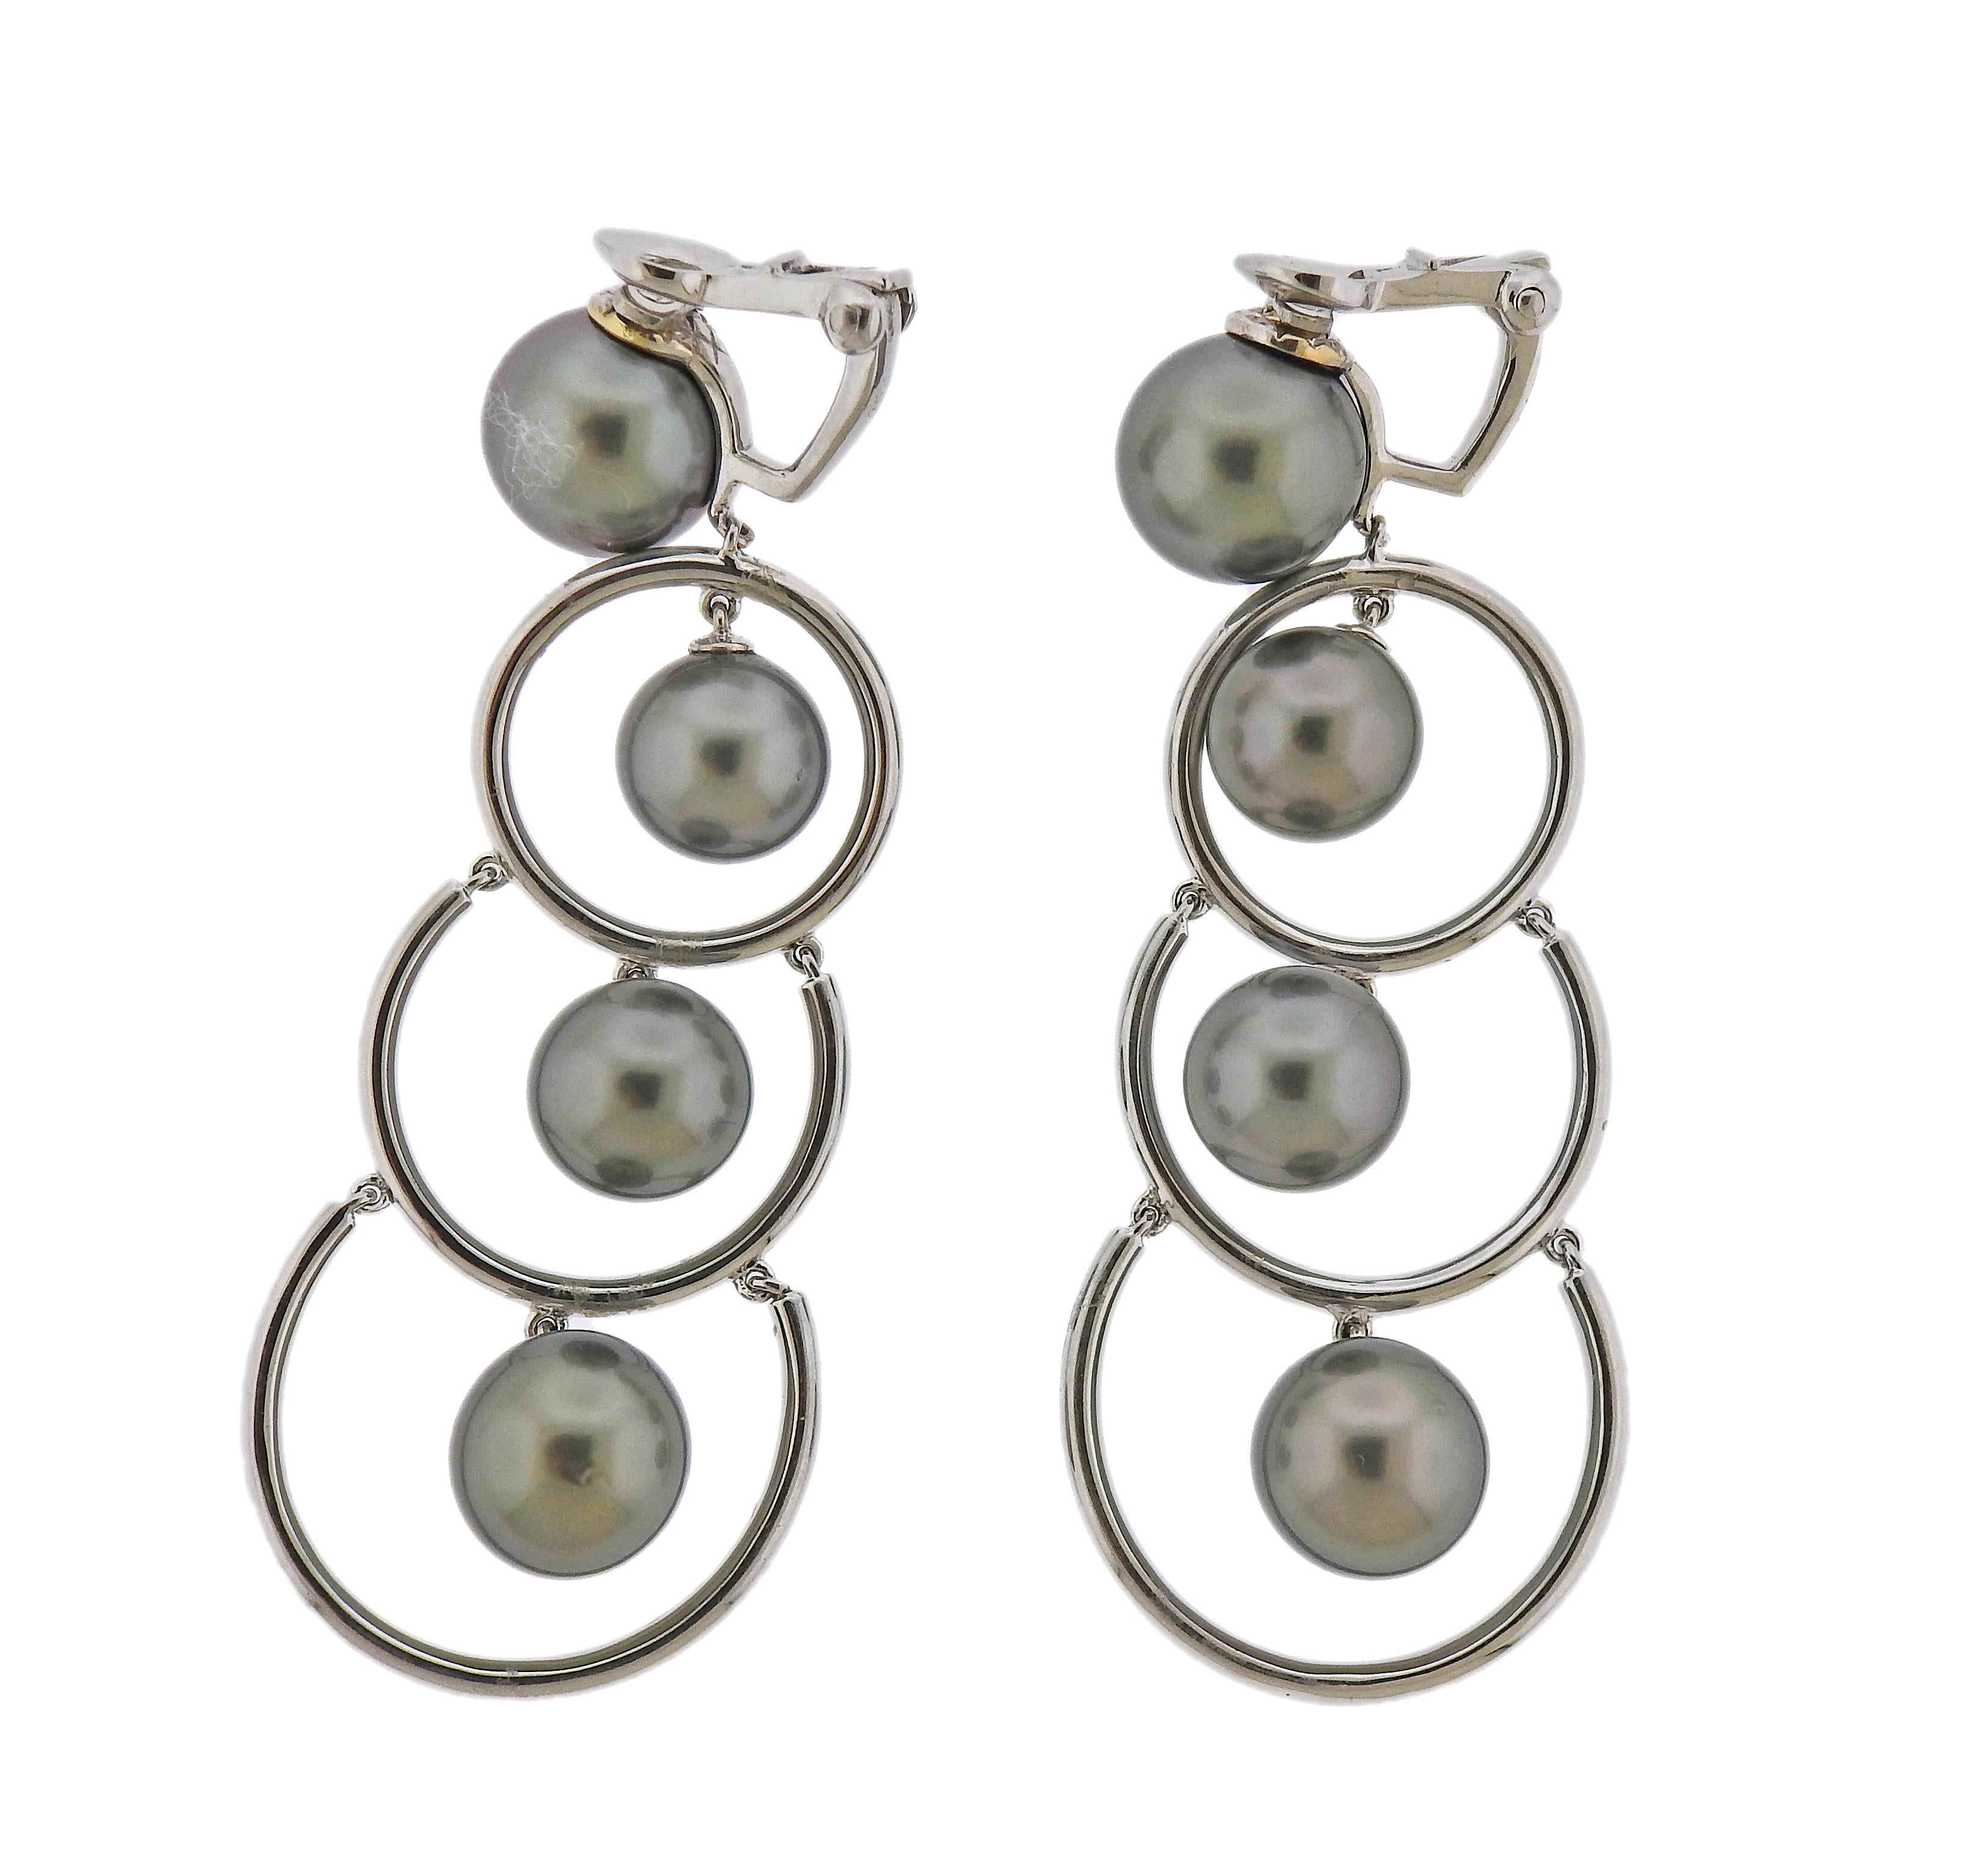 Pair of long 18k white gold earrings with 9.1 - 10.6mm Tahitian pearls, crafted by Assael for Prince Dimitri. Retail $4500. Earrings are 60mm long x 25mm wide. weight - 25. 9 grams. Marked: A mark, Prince Dimitri mark, 750.